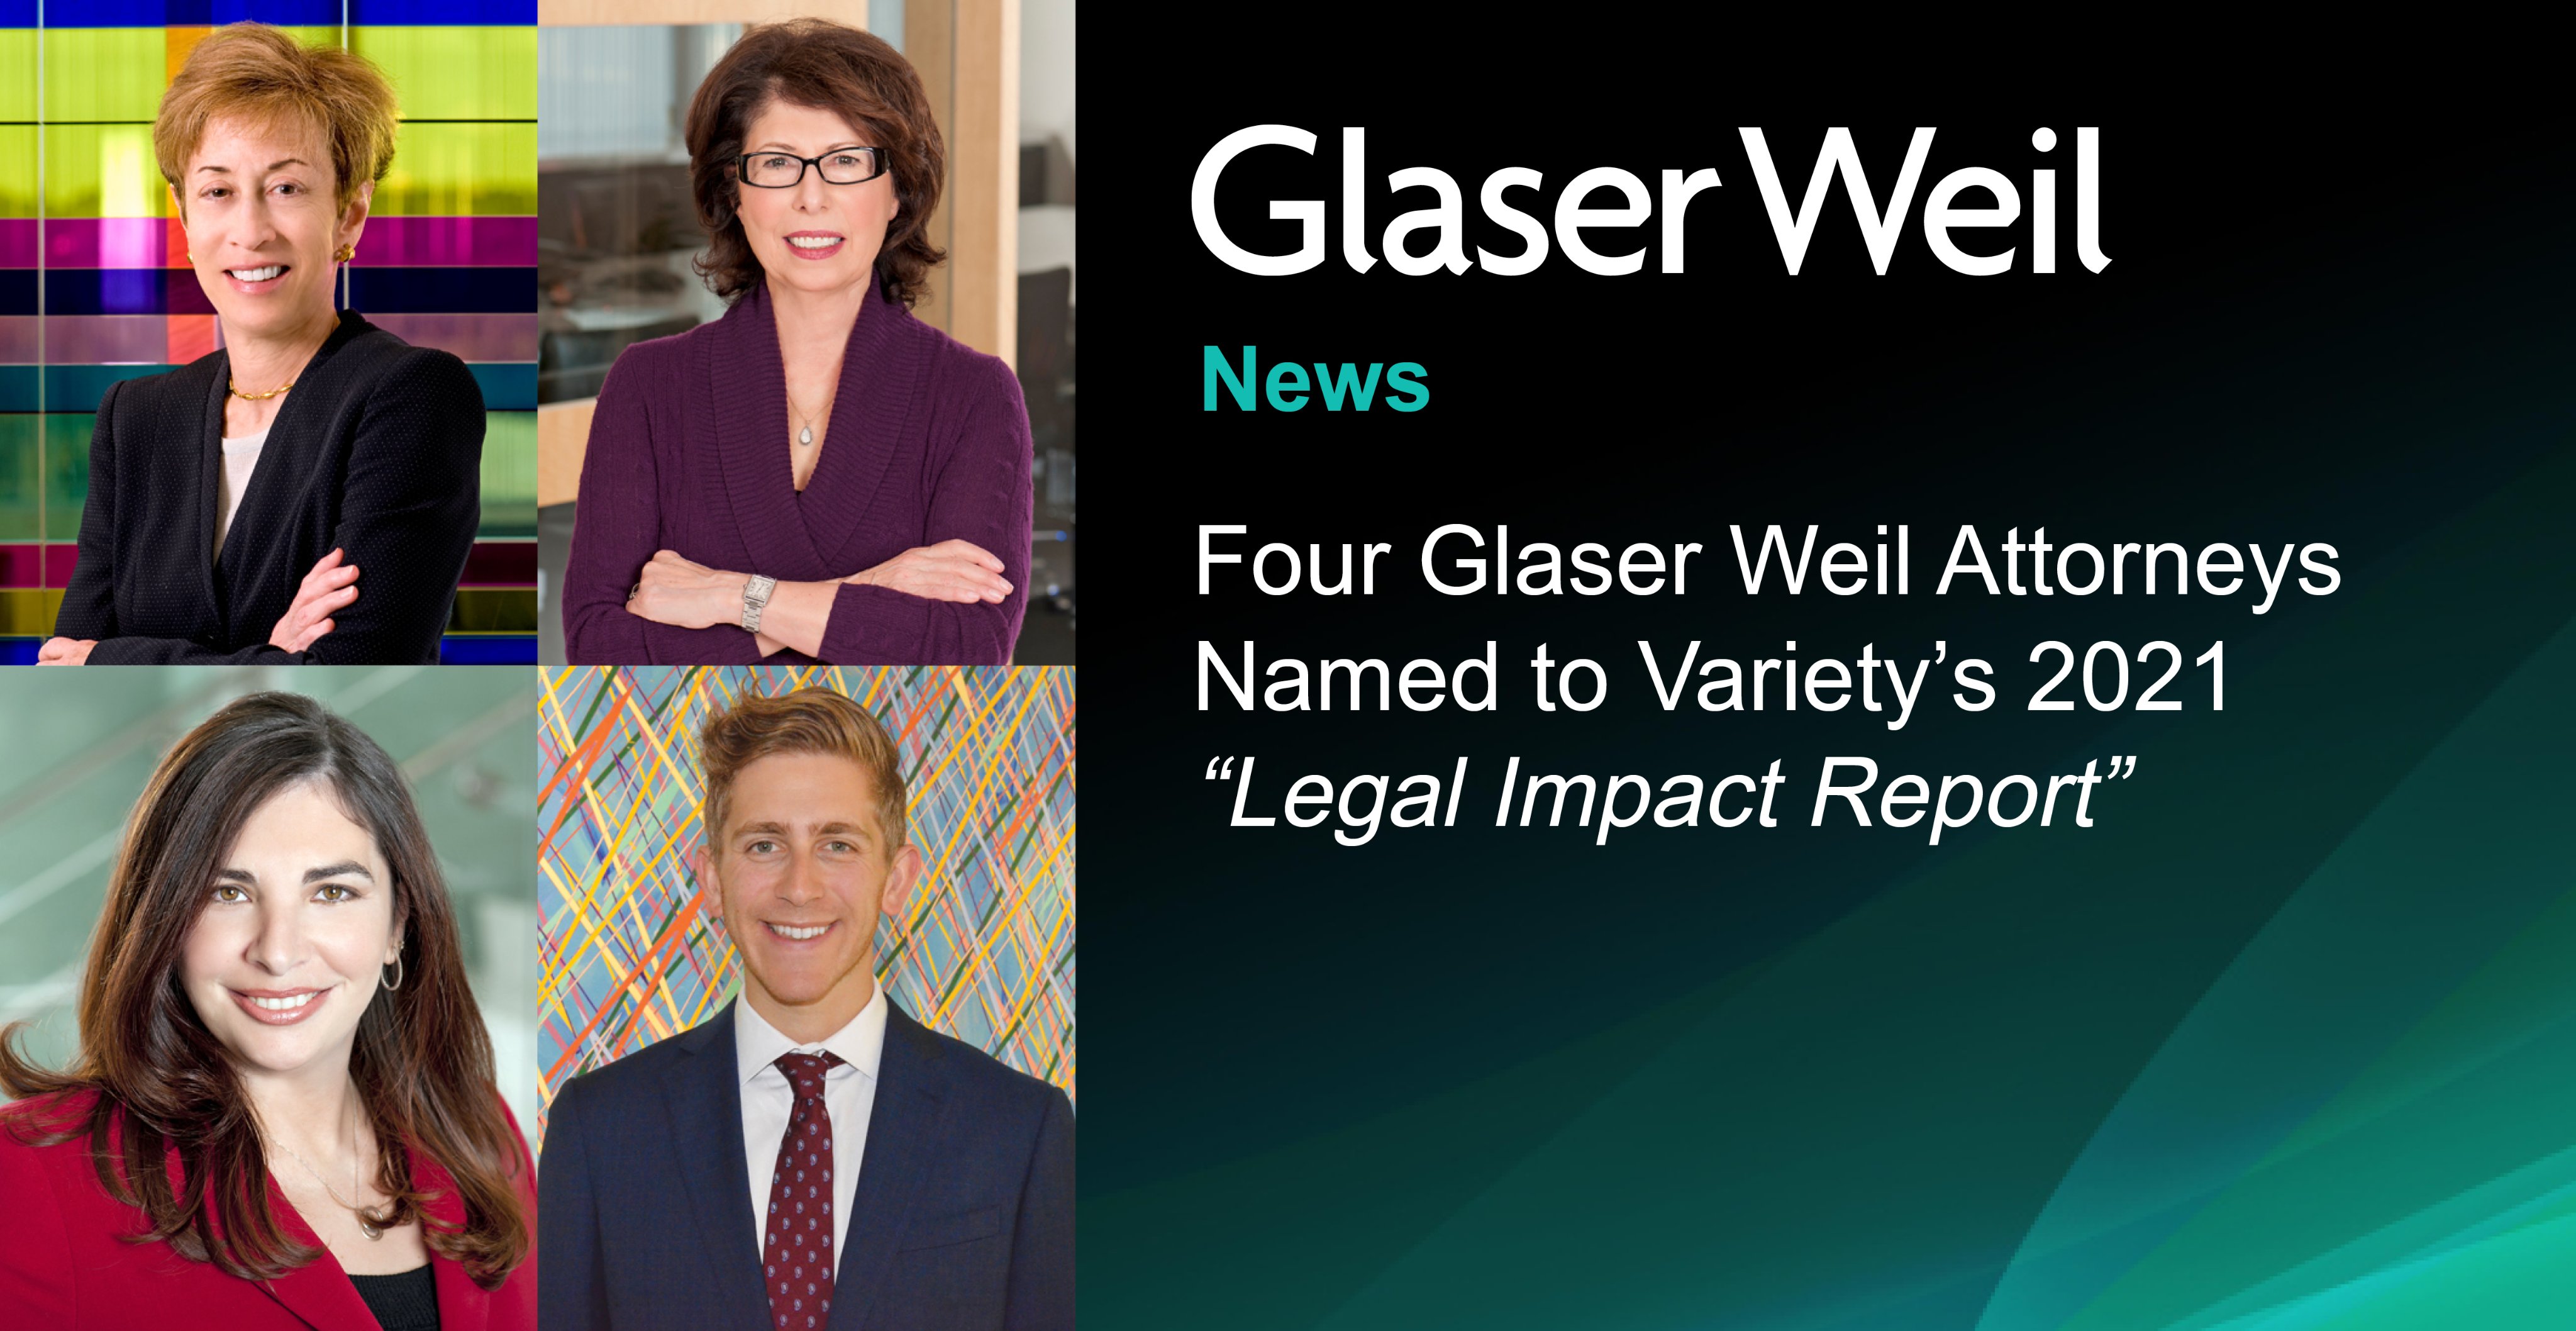 Variety's Legal Impact Report 2021